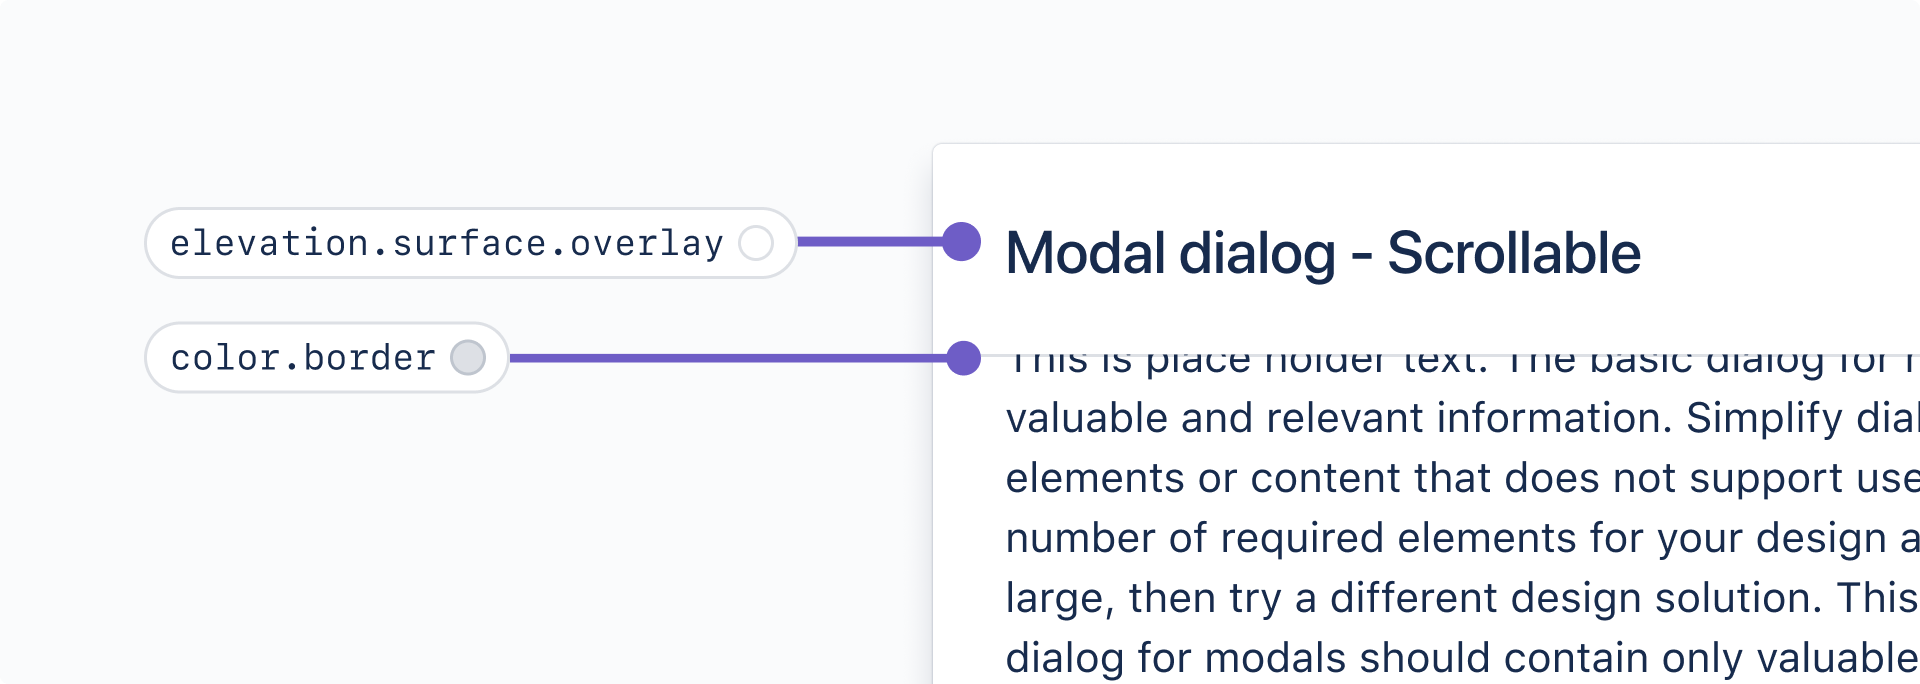 In a scrollable modal, the sticky header uses elevation.surface.overlay and color.border.